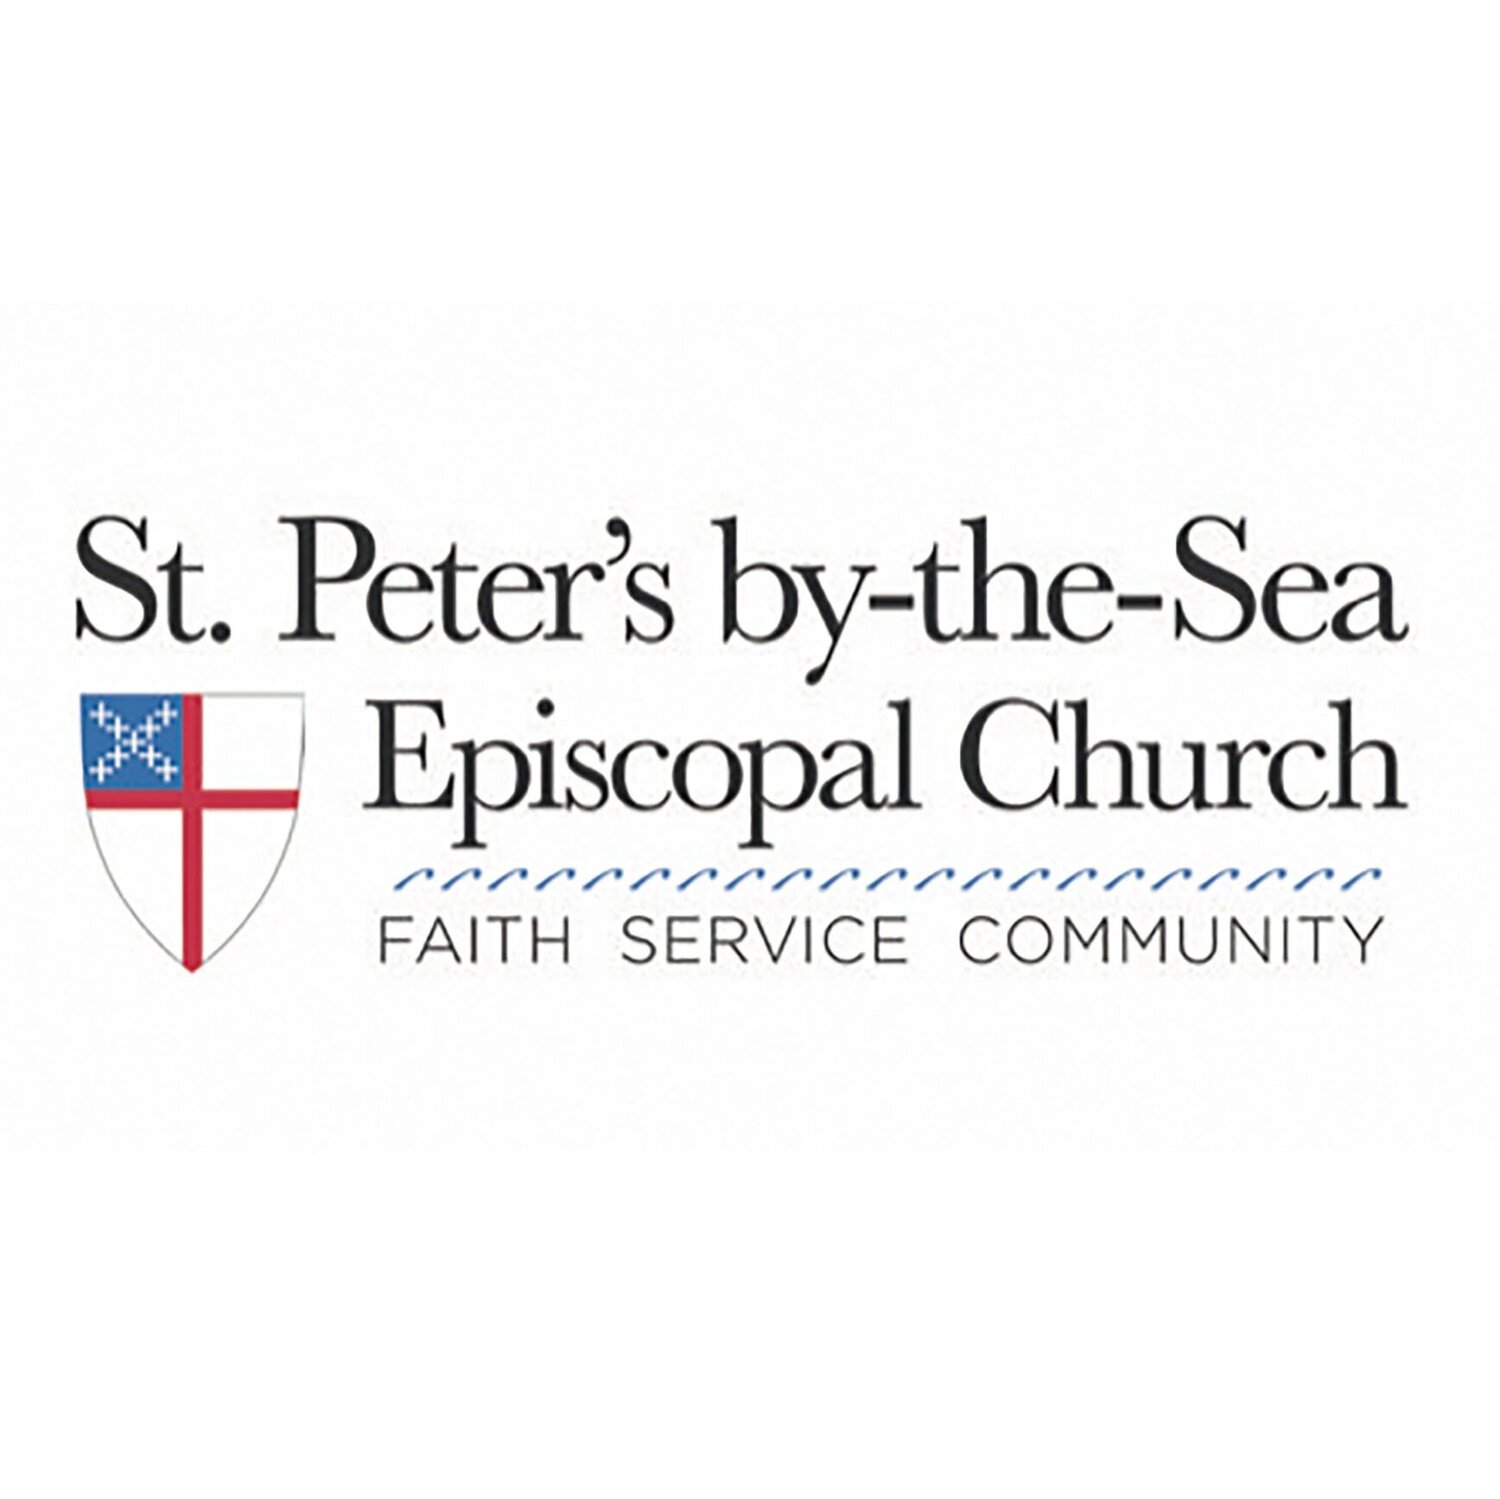 St. Peter's by-the-Sea